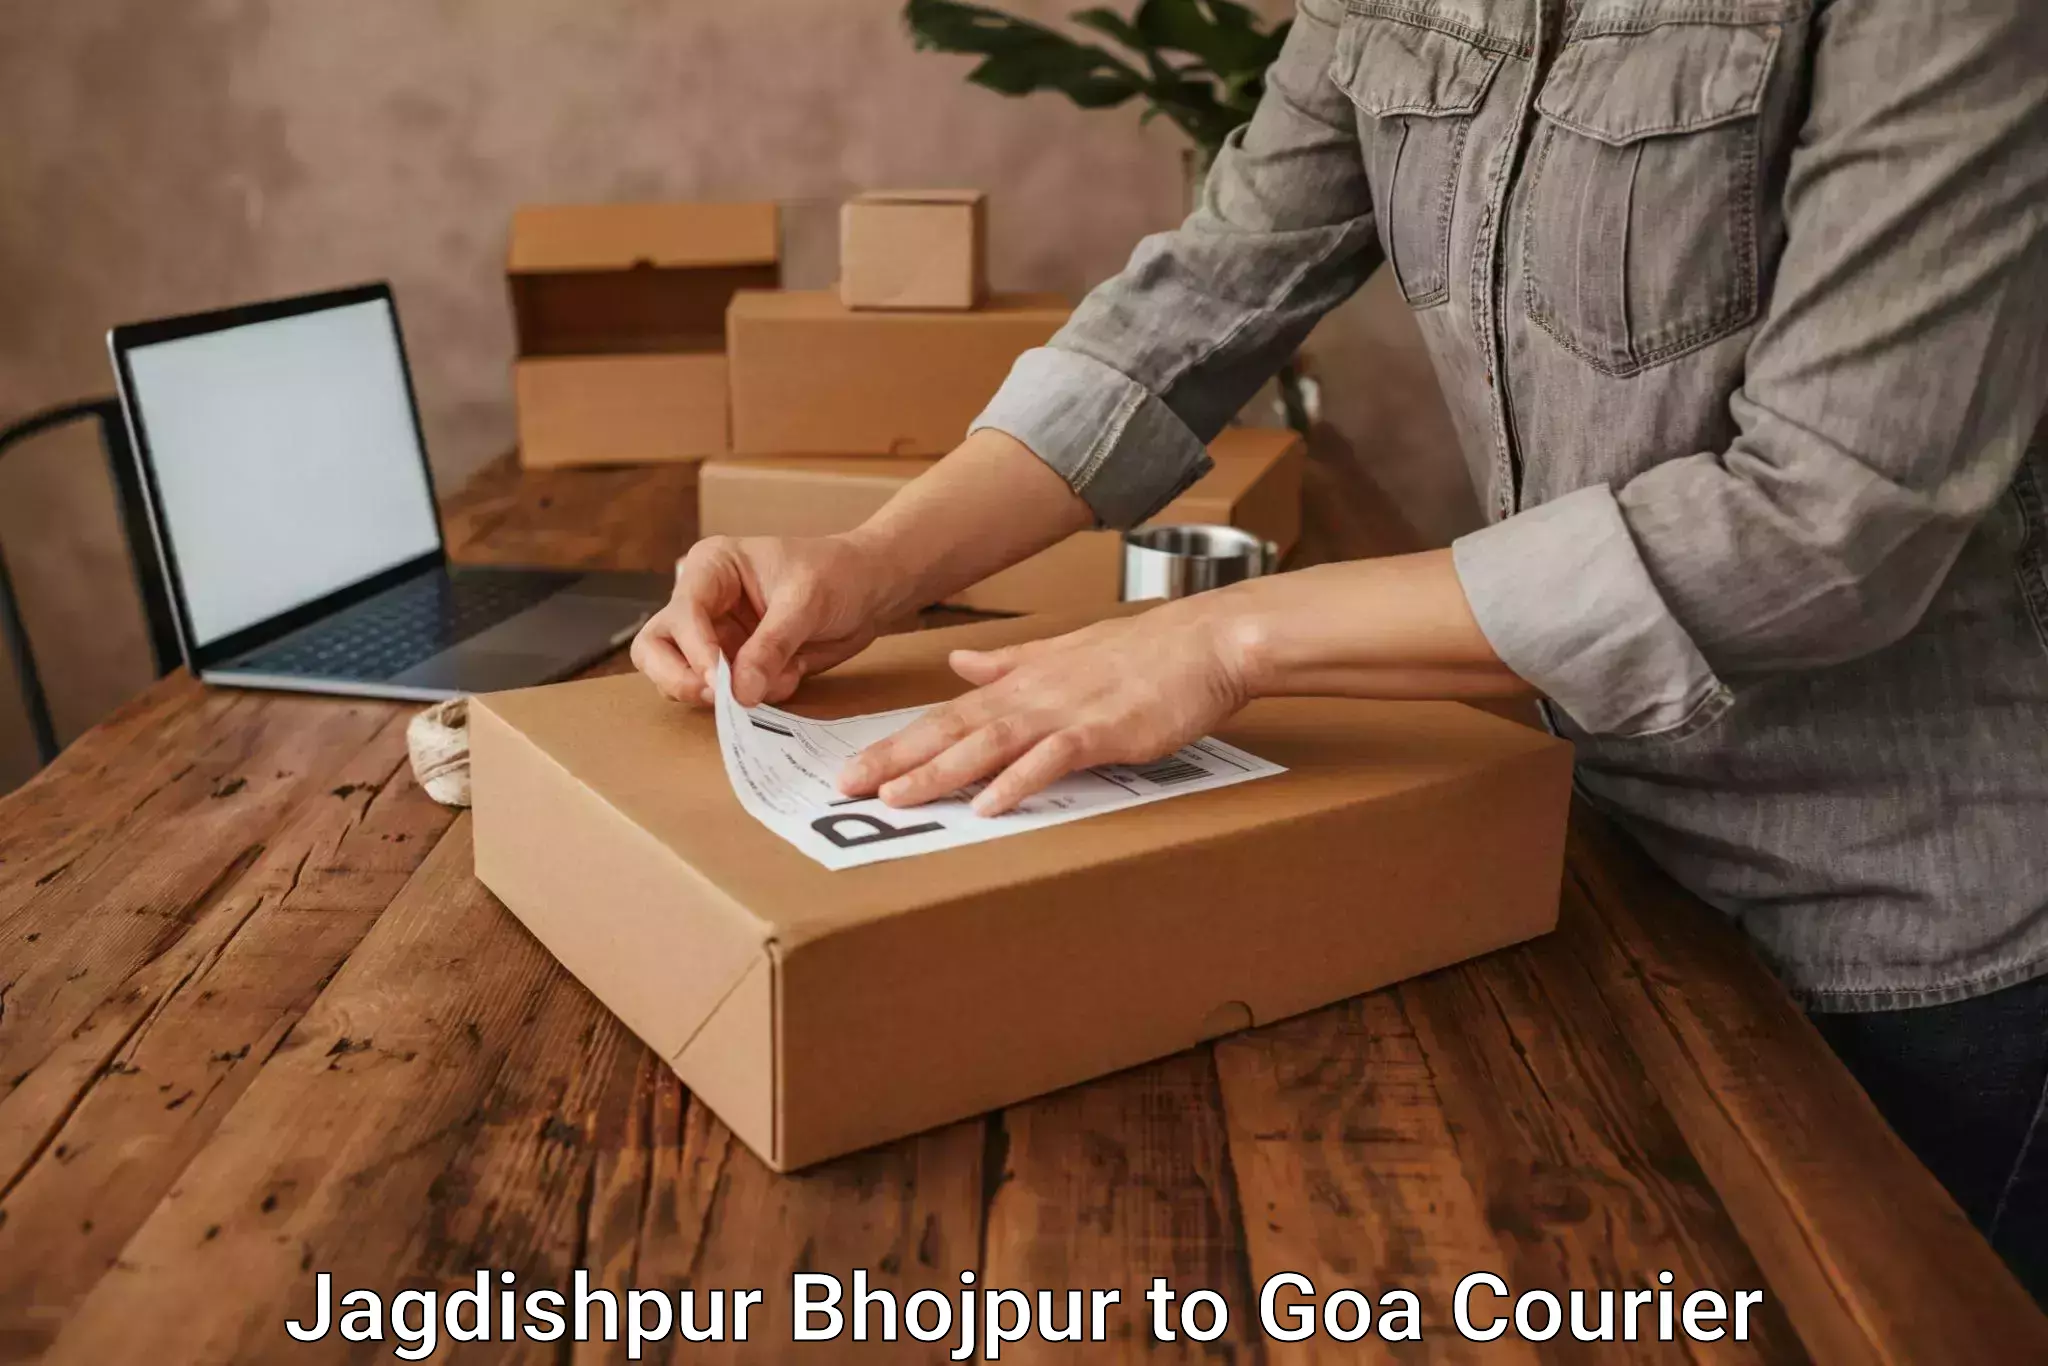 Hassle-free relocation Jagdishpur Bhojpur to South Goa